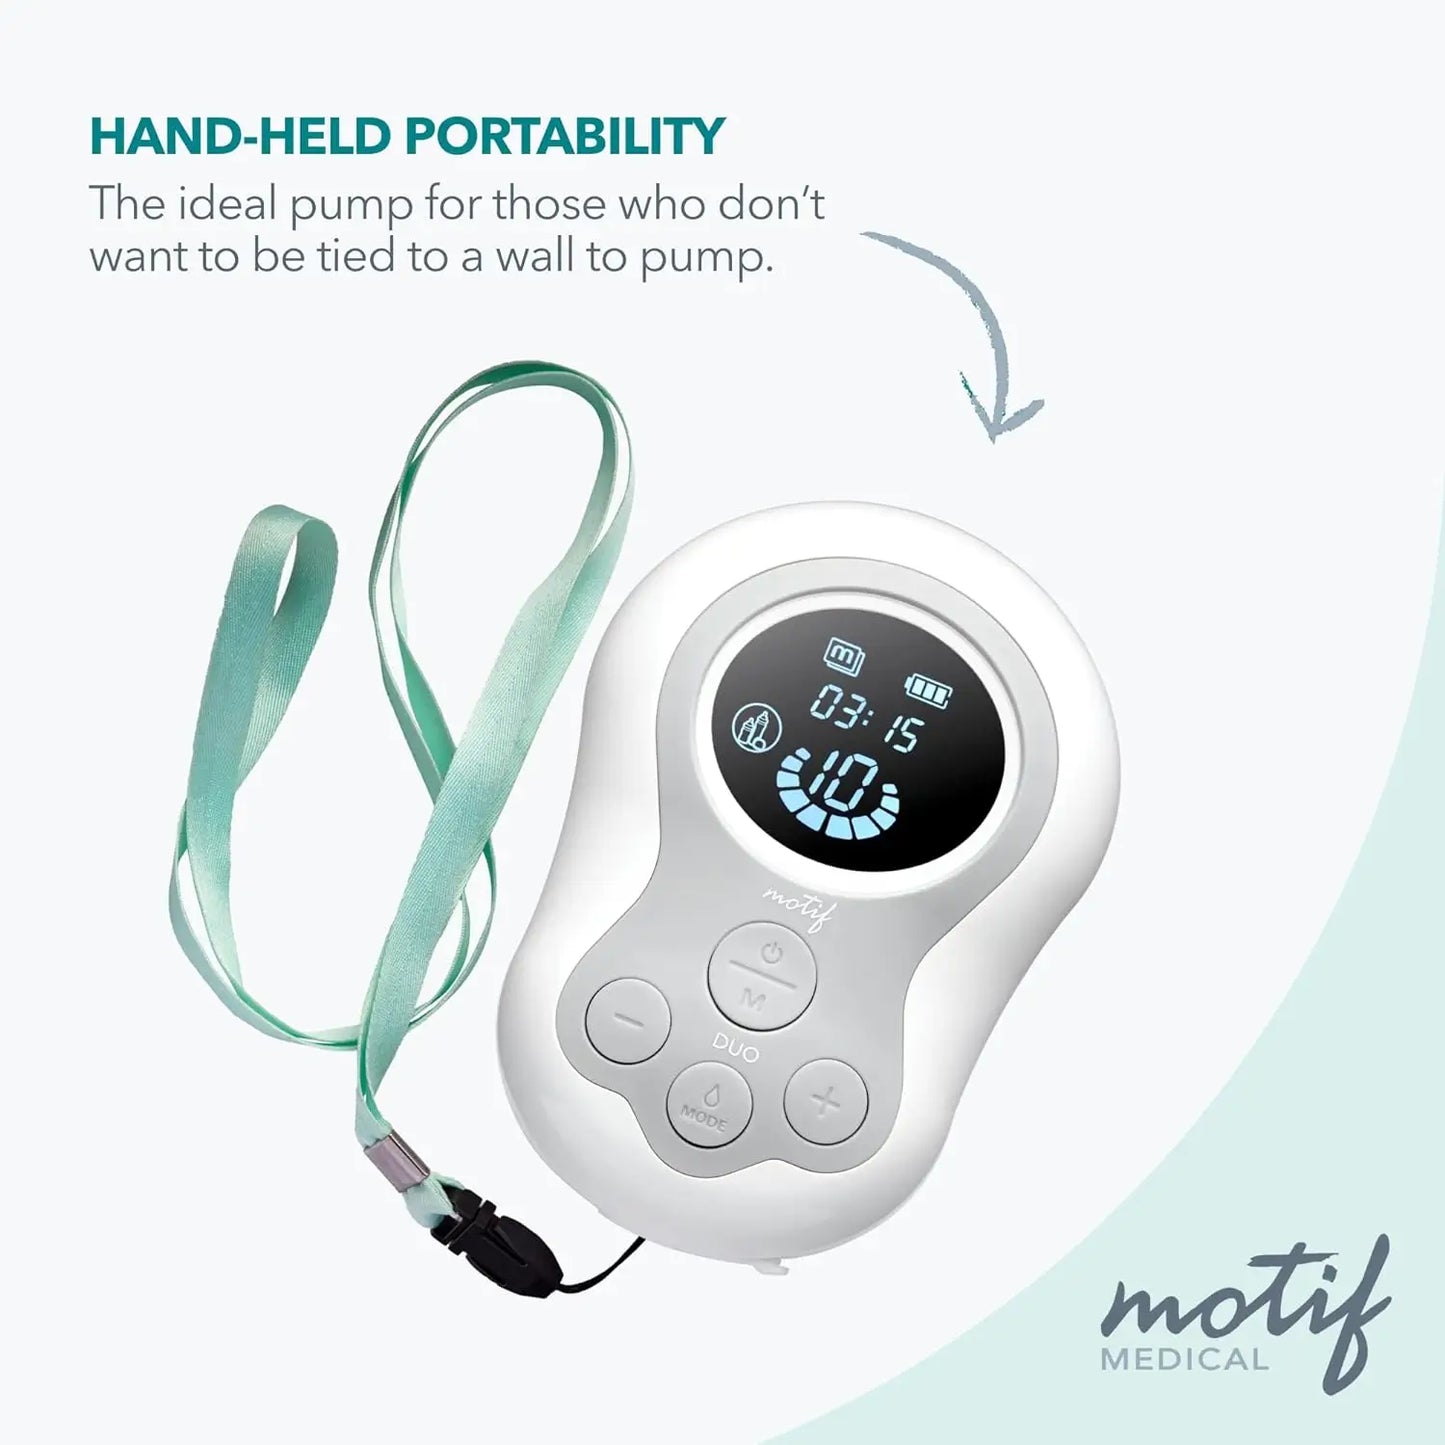 Compact Motif Duo breast pump with a powerful rechargeable battery, allowing over 2.5 hours of pumping anywhere."